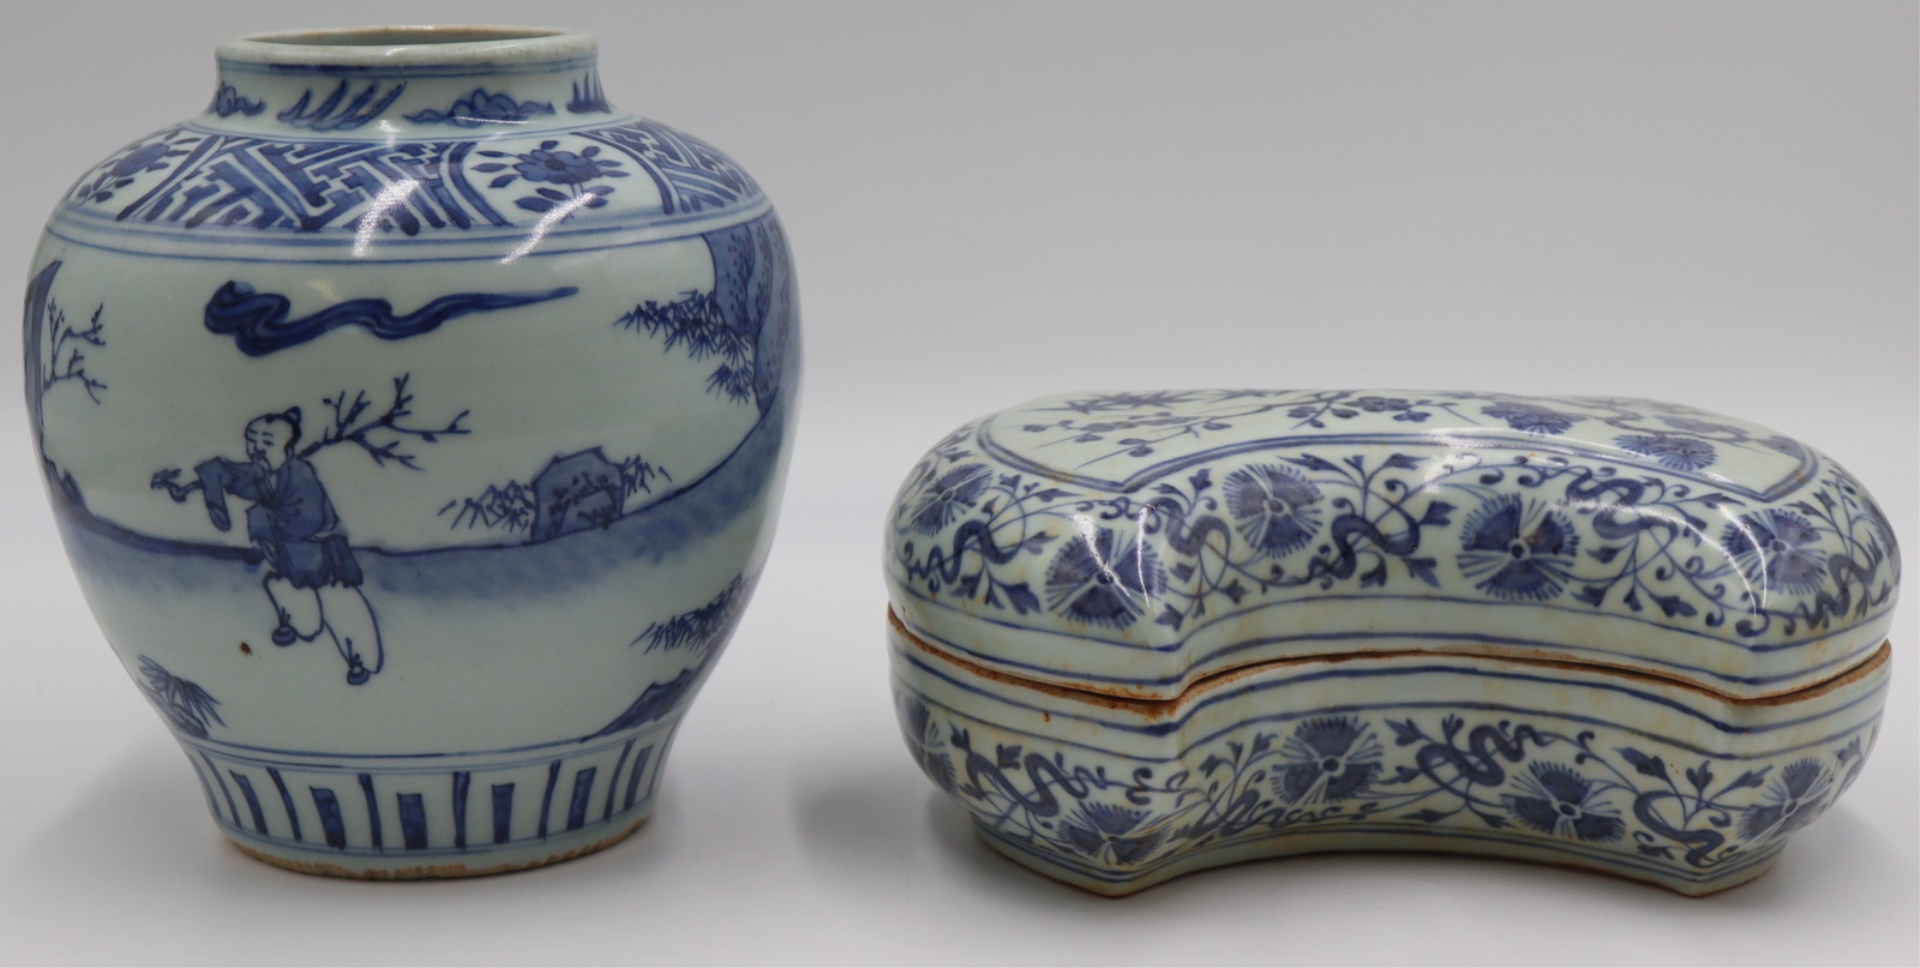 GROUPING OF CHINESE BLUE AND WHITE